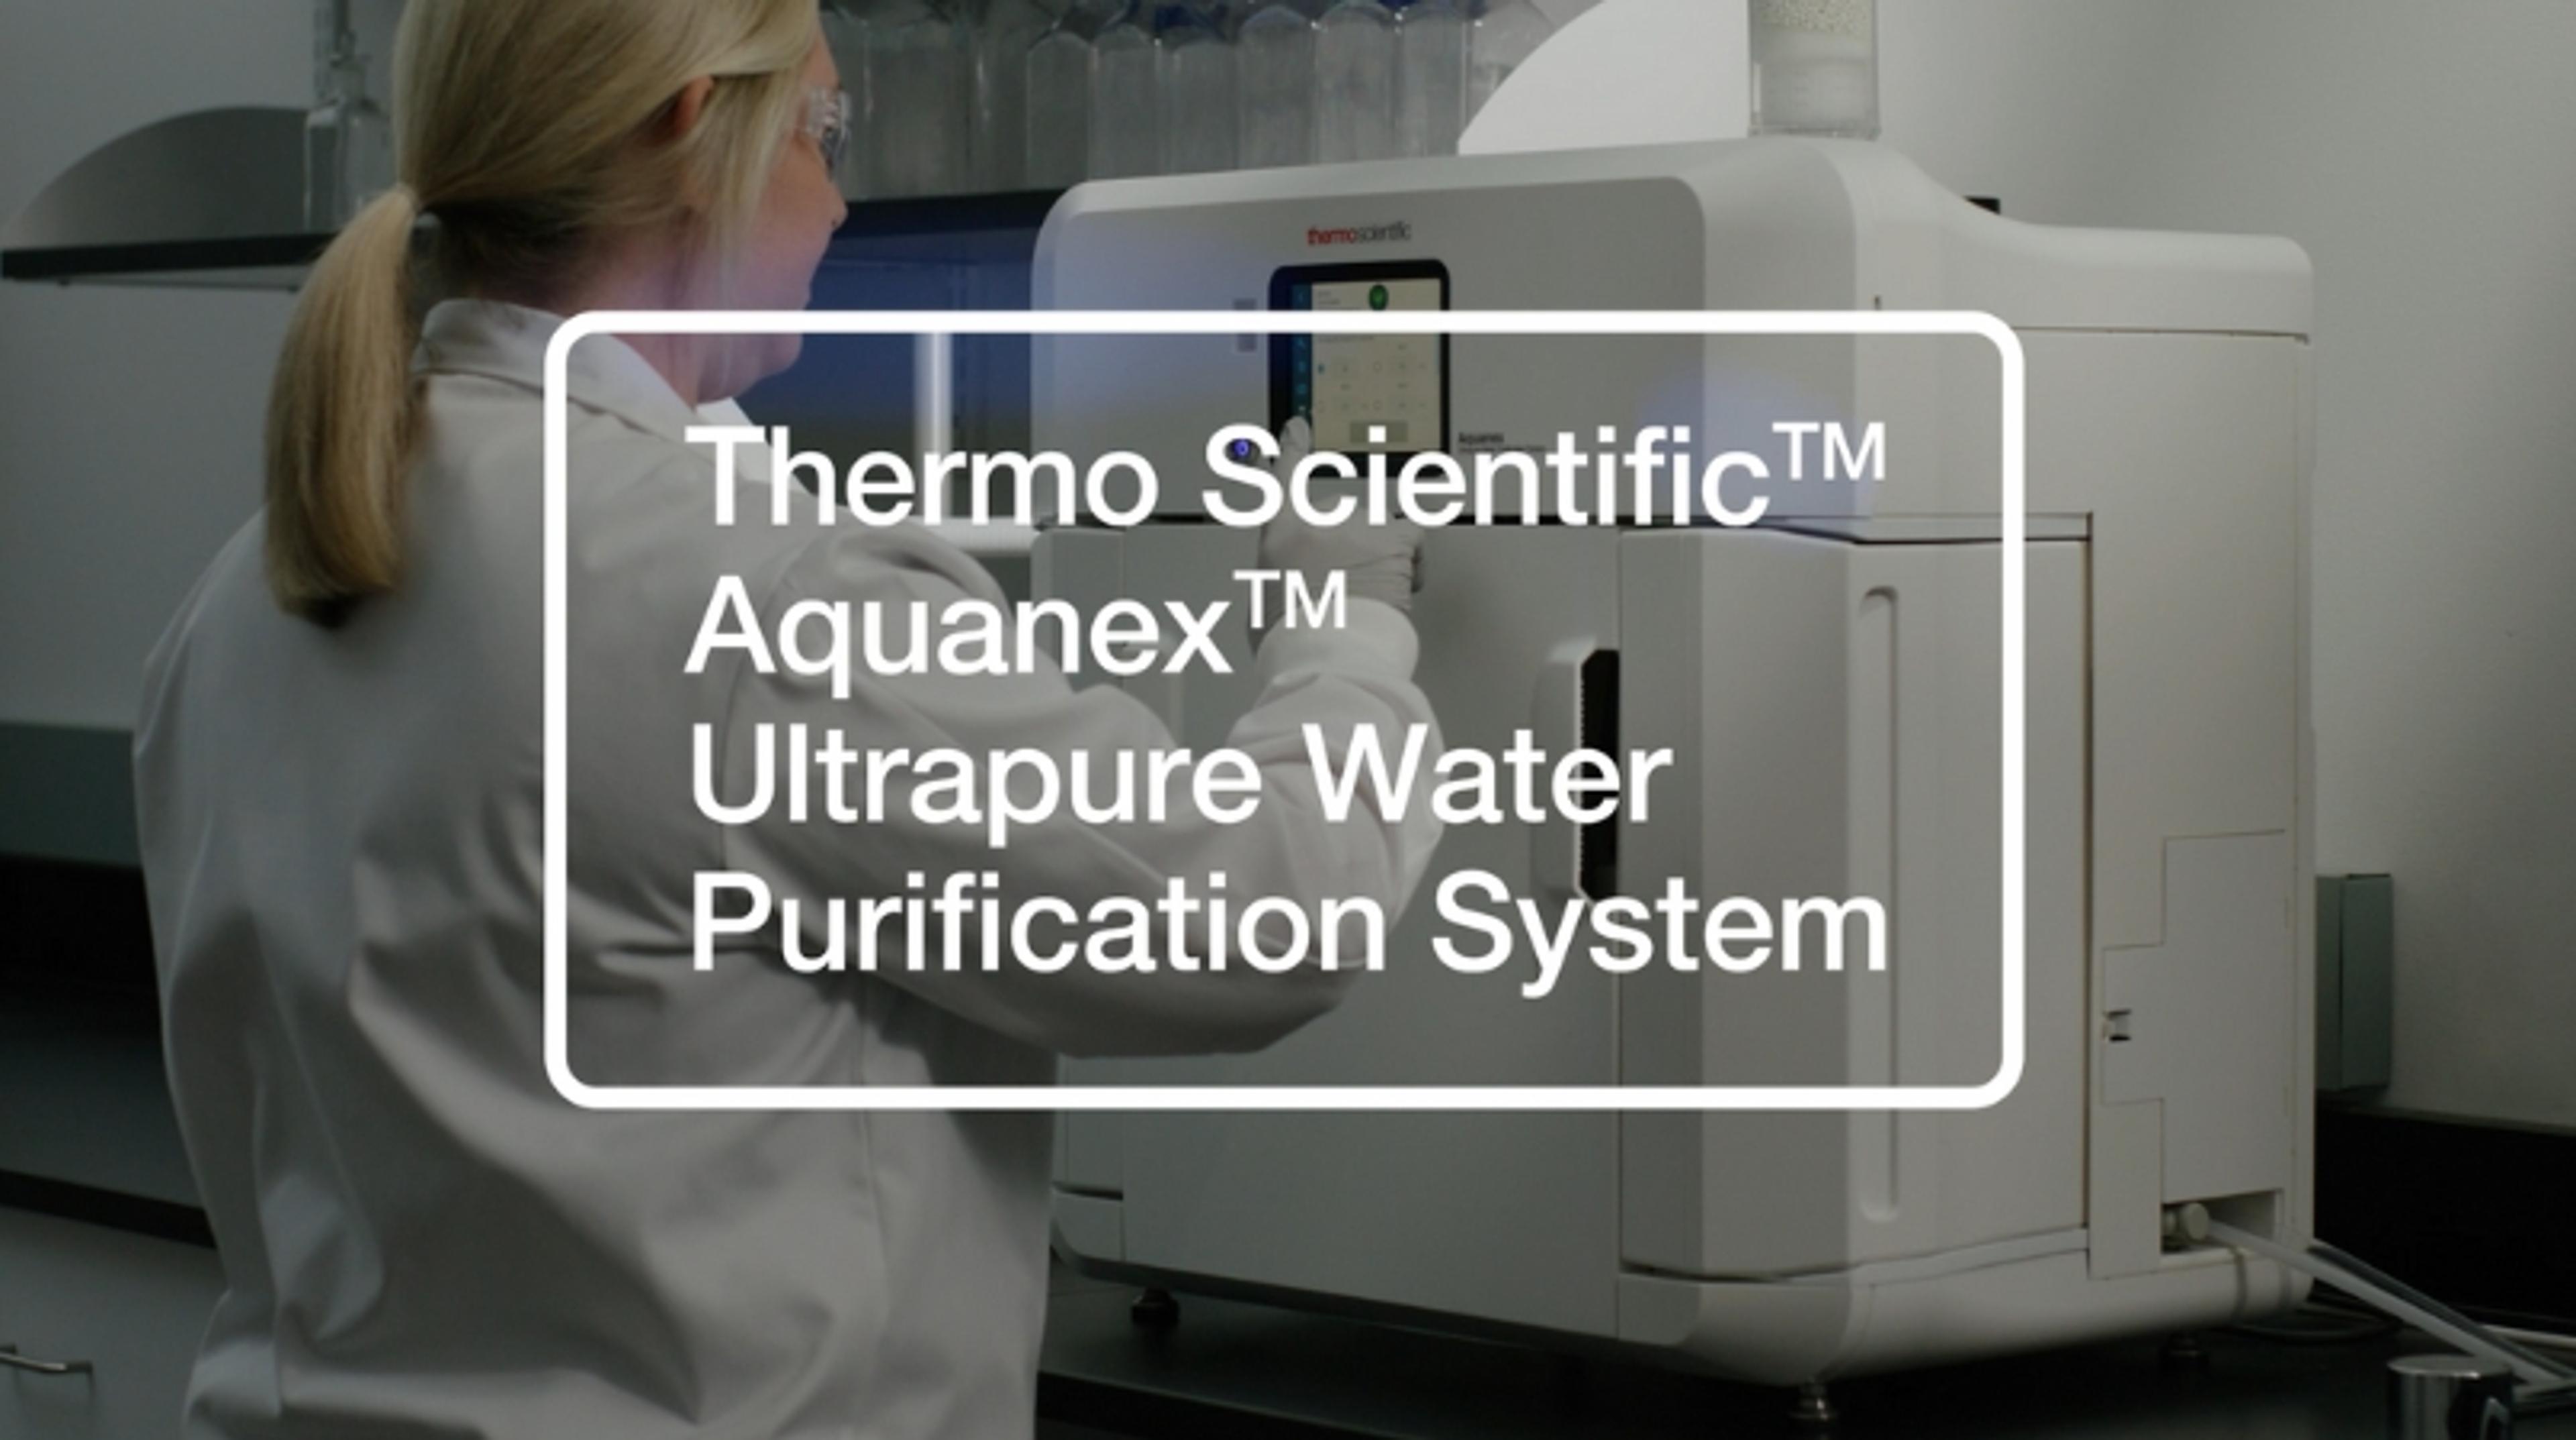 Aquanex Ultrapure Water Purification System from Thermo Fisher Scientific 